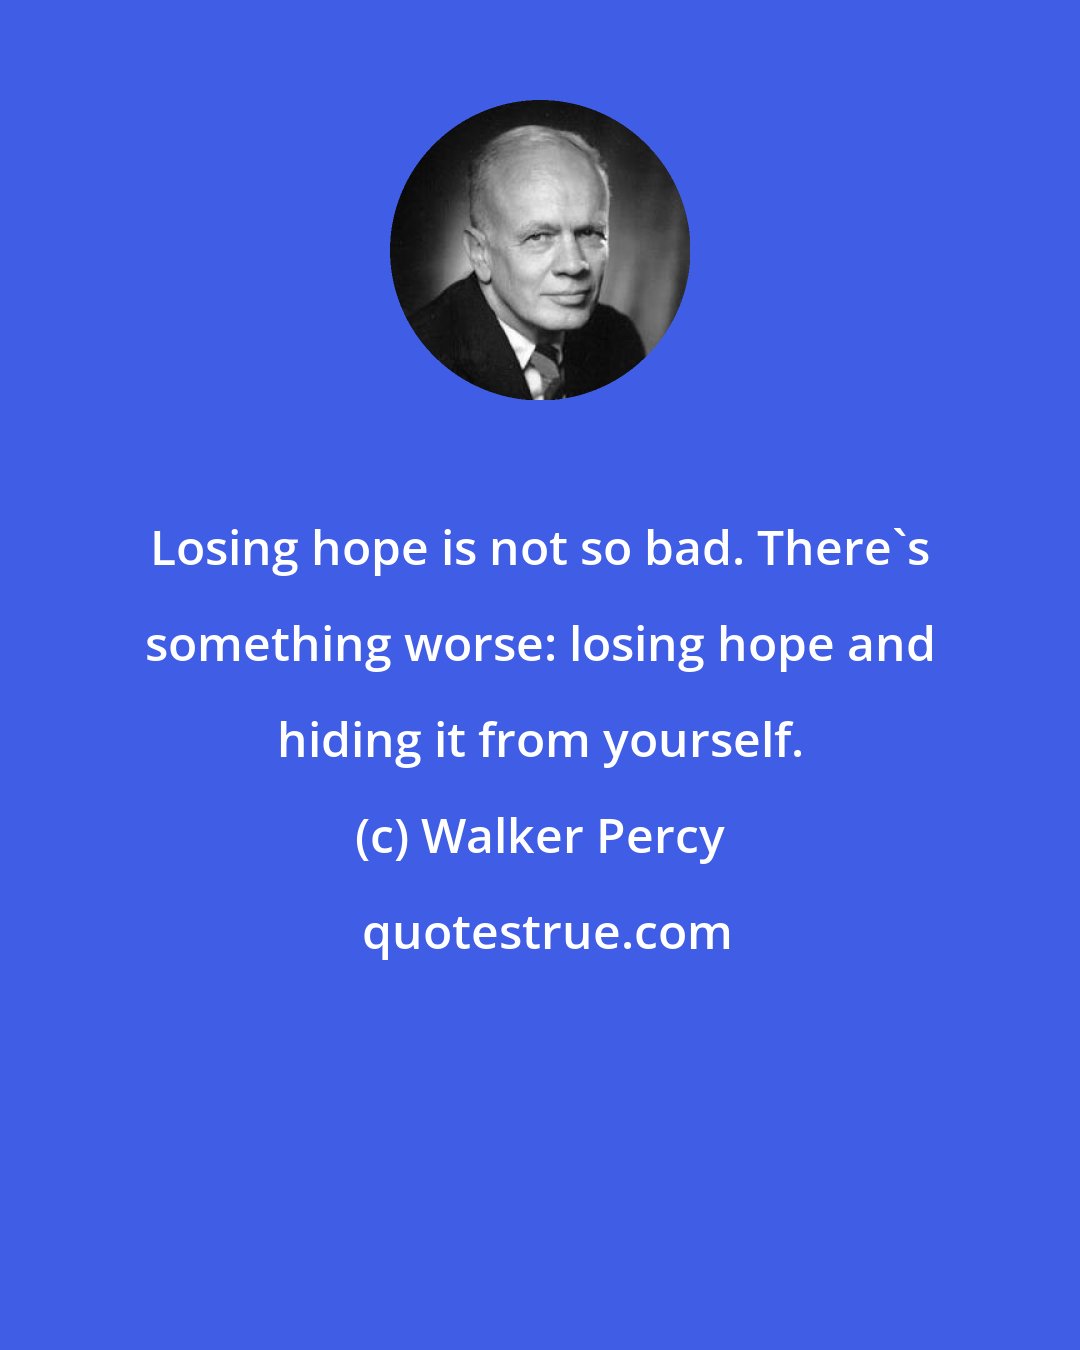 Walker Percy: Losing hope is not so bad. There's something worse: losing hope and hiding it from yourself.